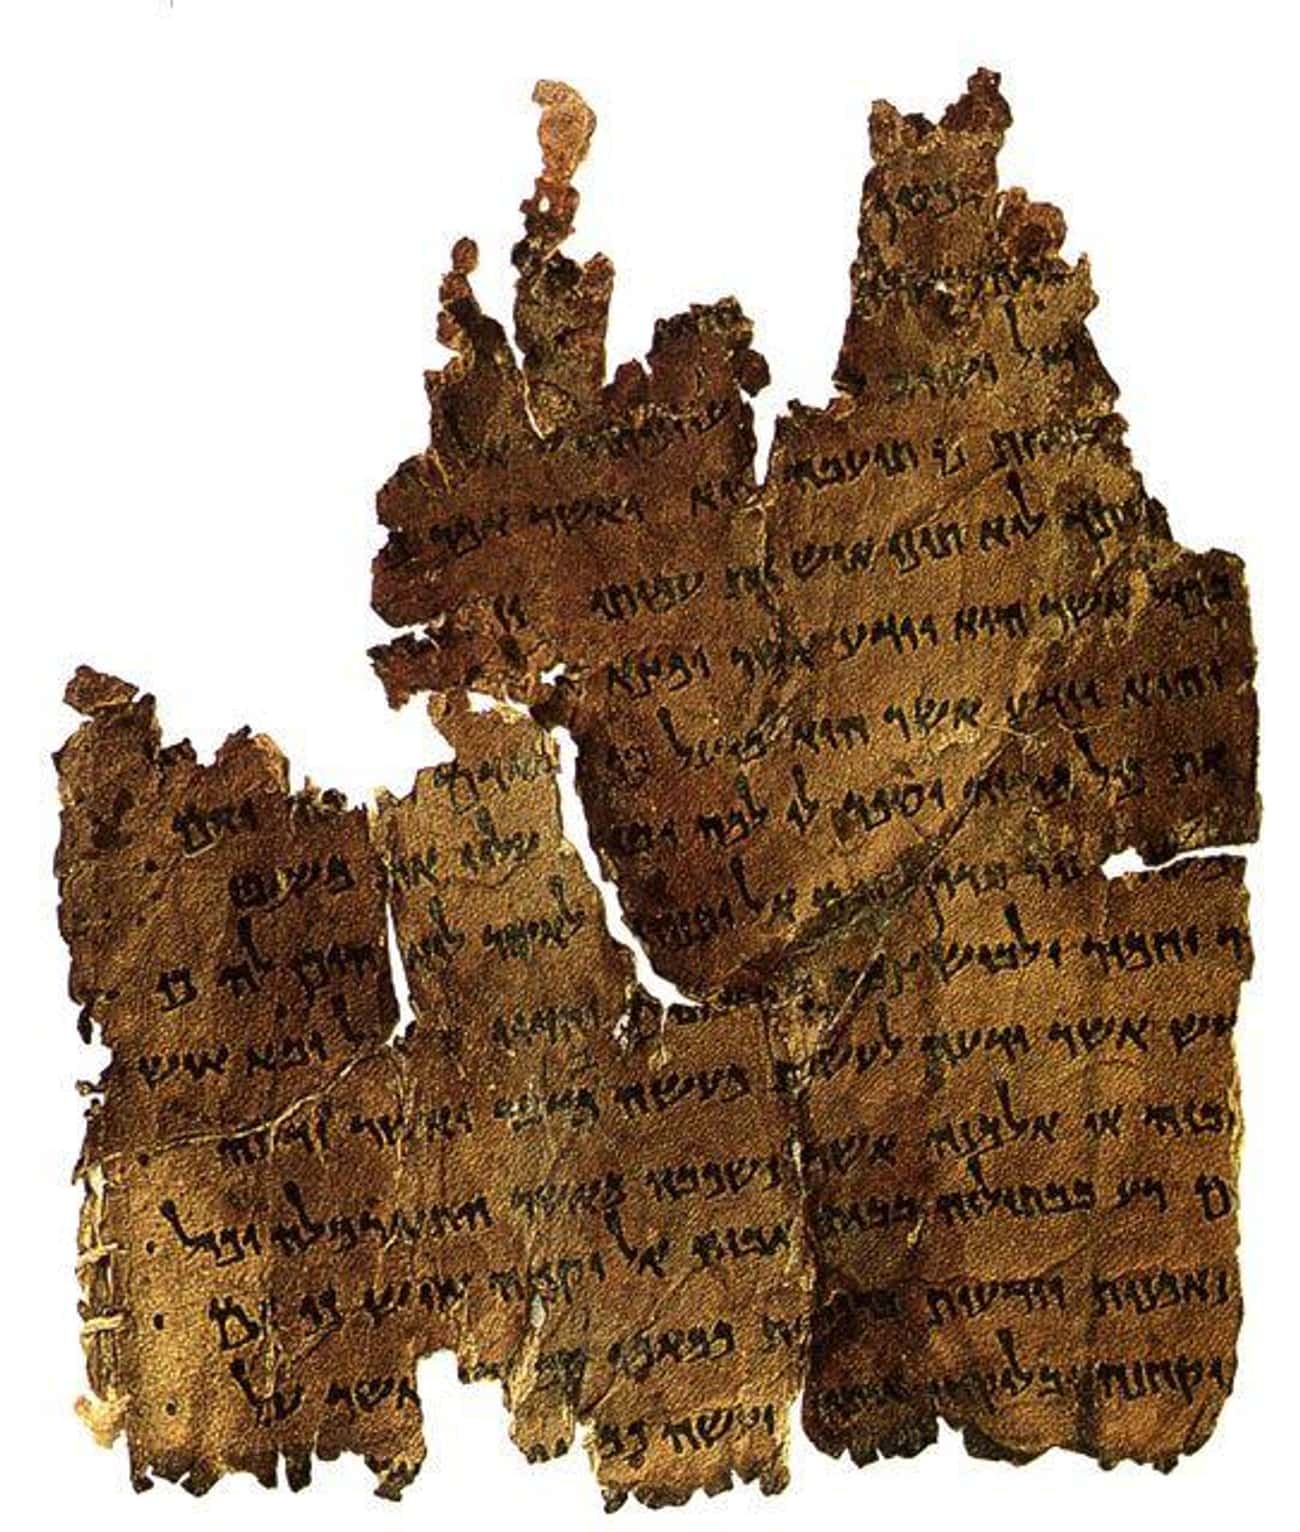 New Text Was Discovered On Blank Dead Sea Scrolls